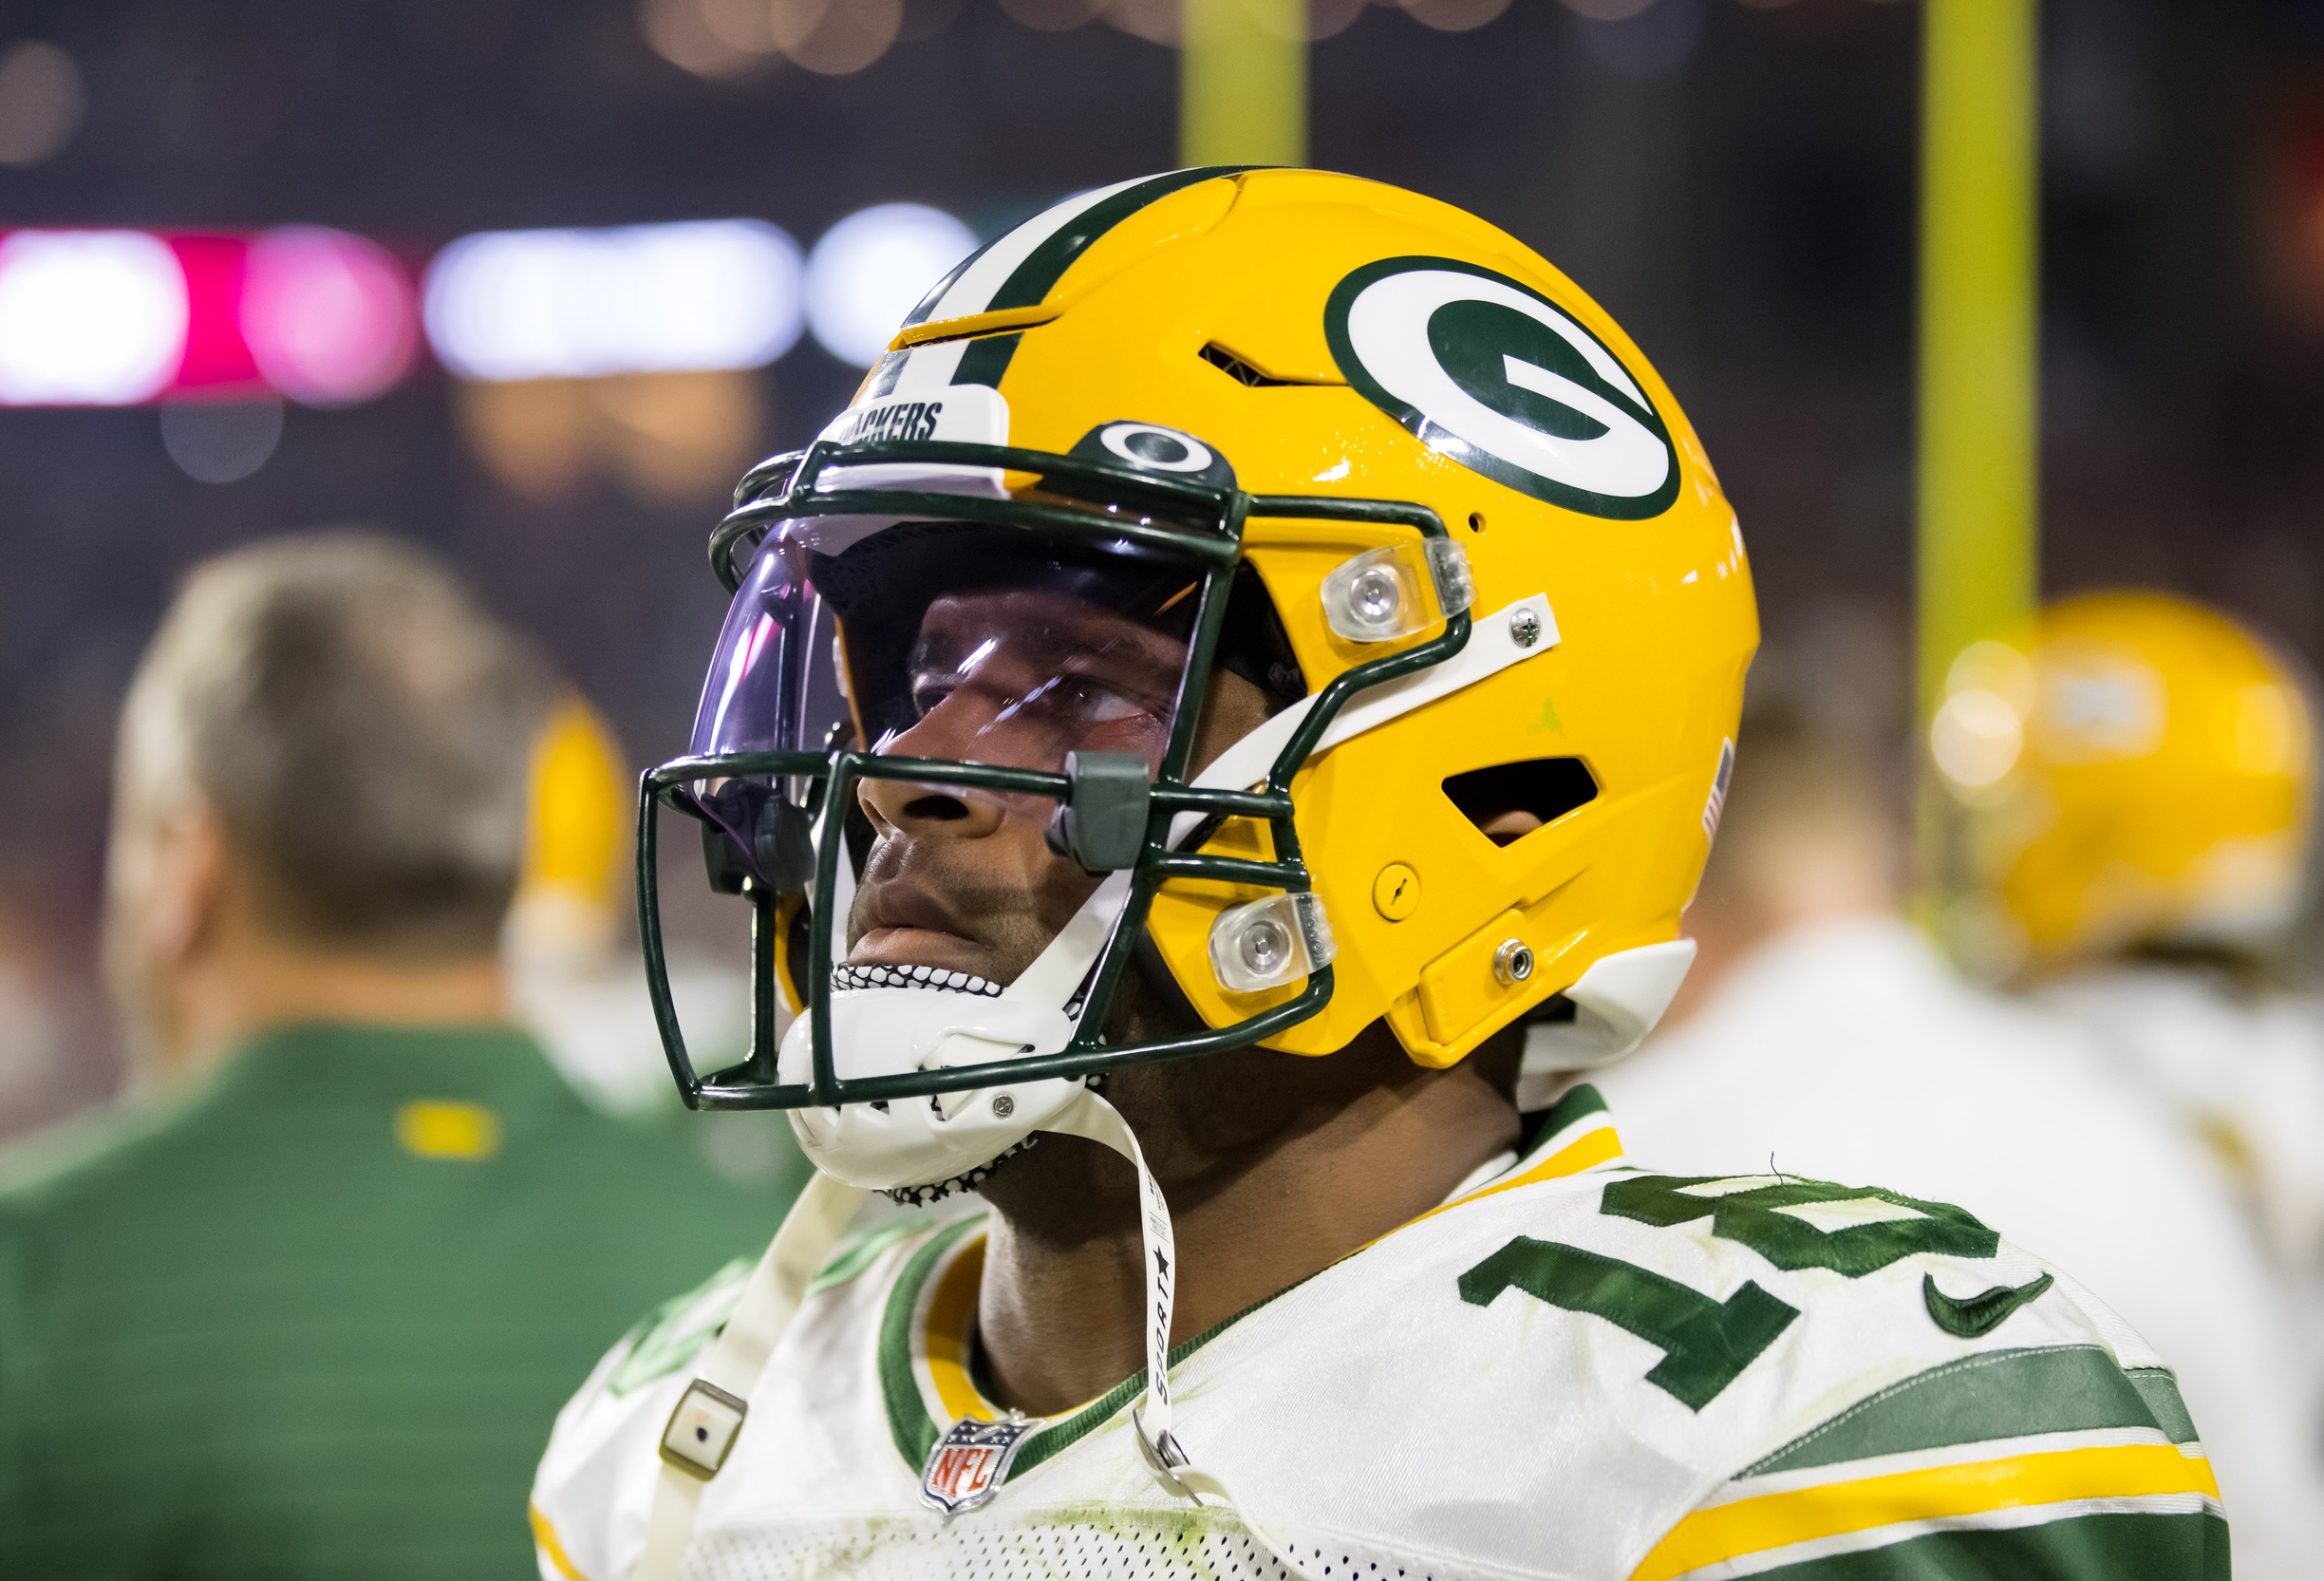 Future of several Packers players may hinge on Rodgers returning